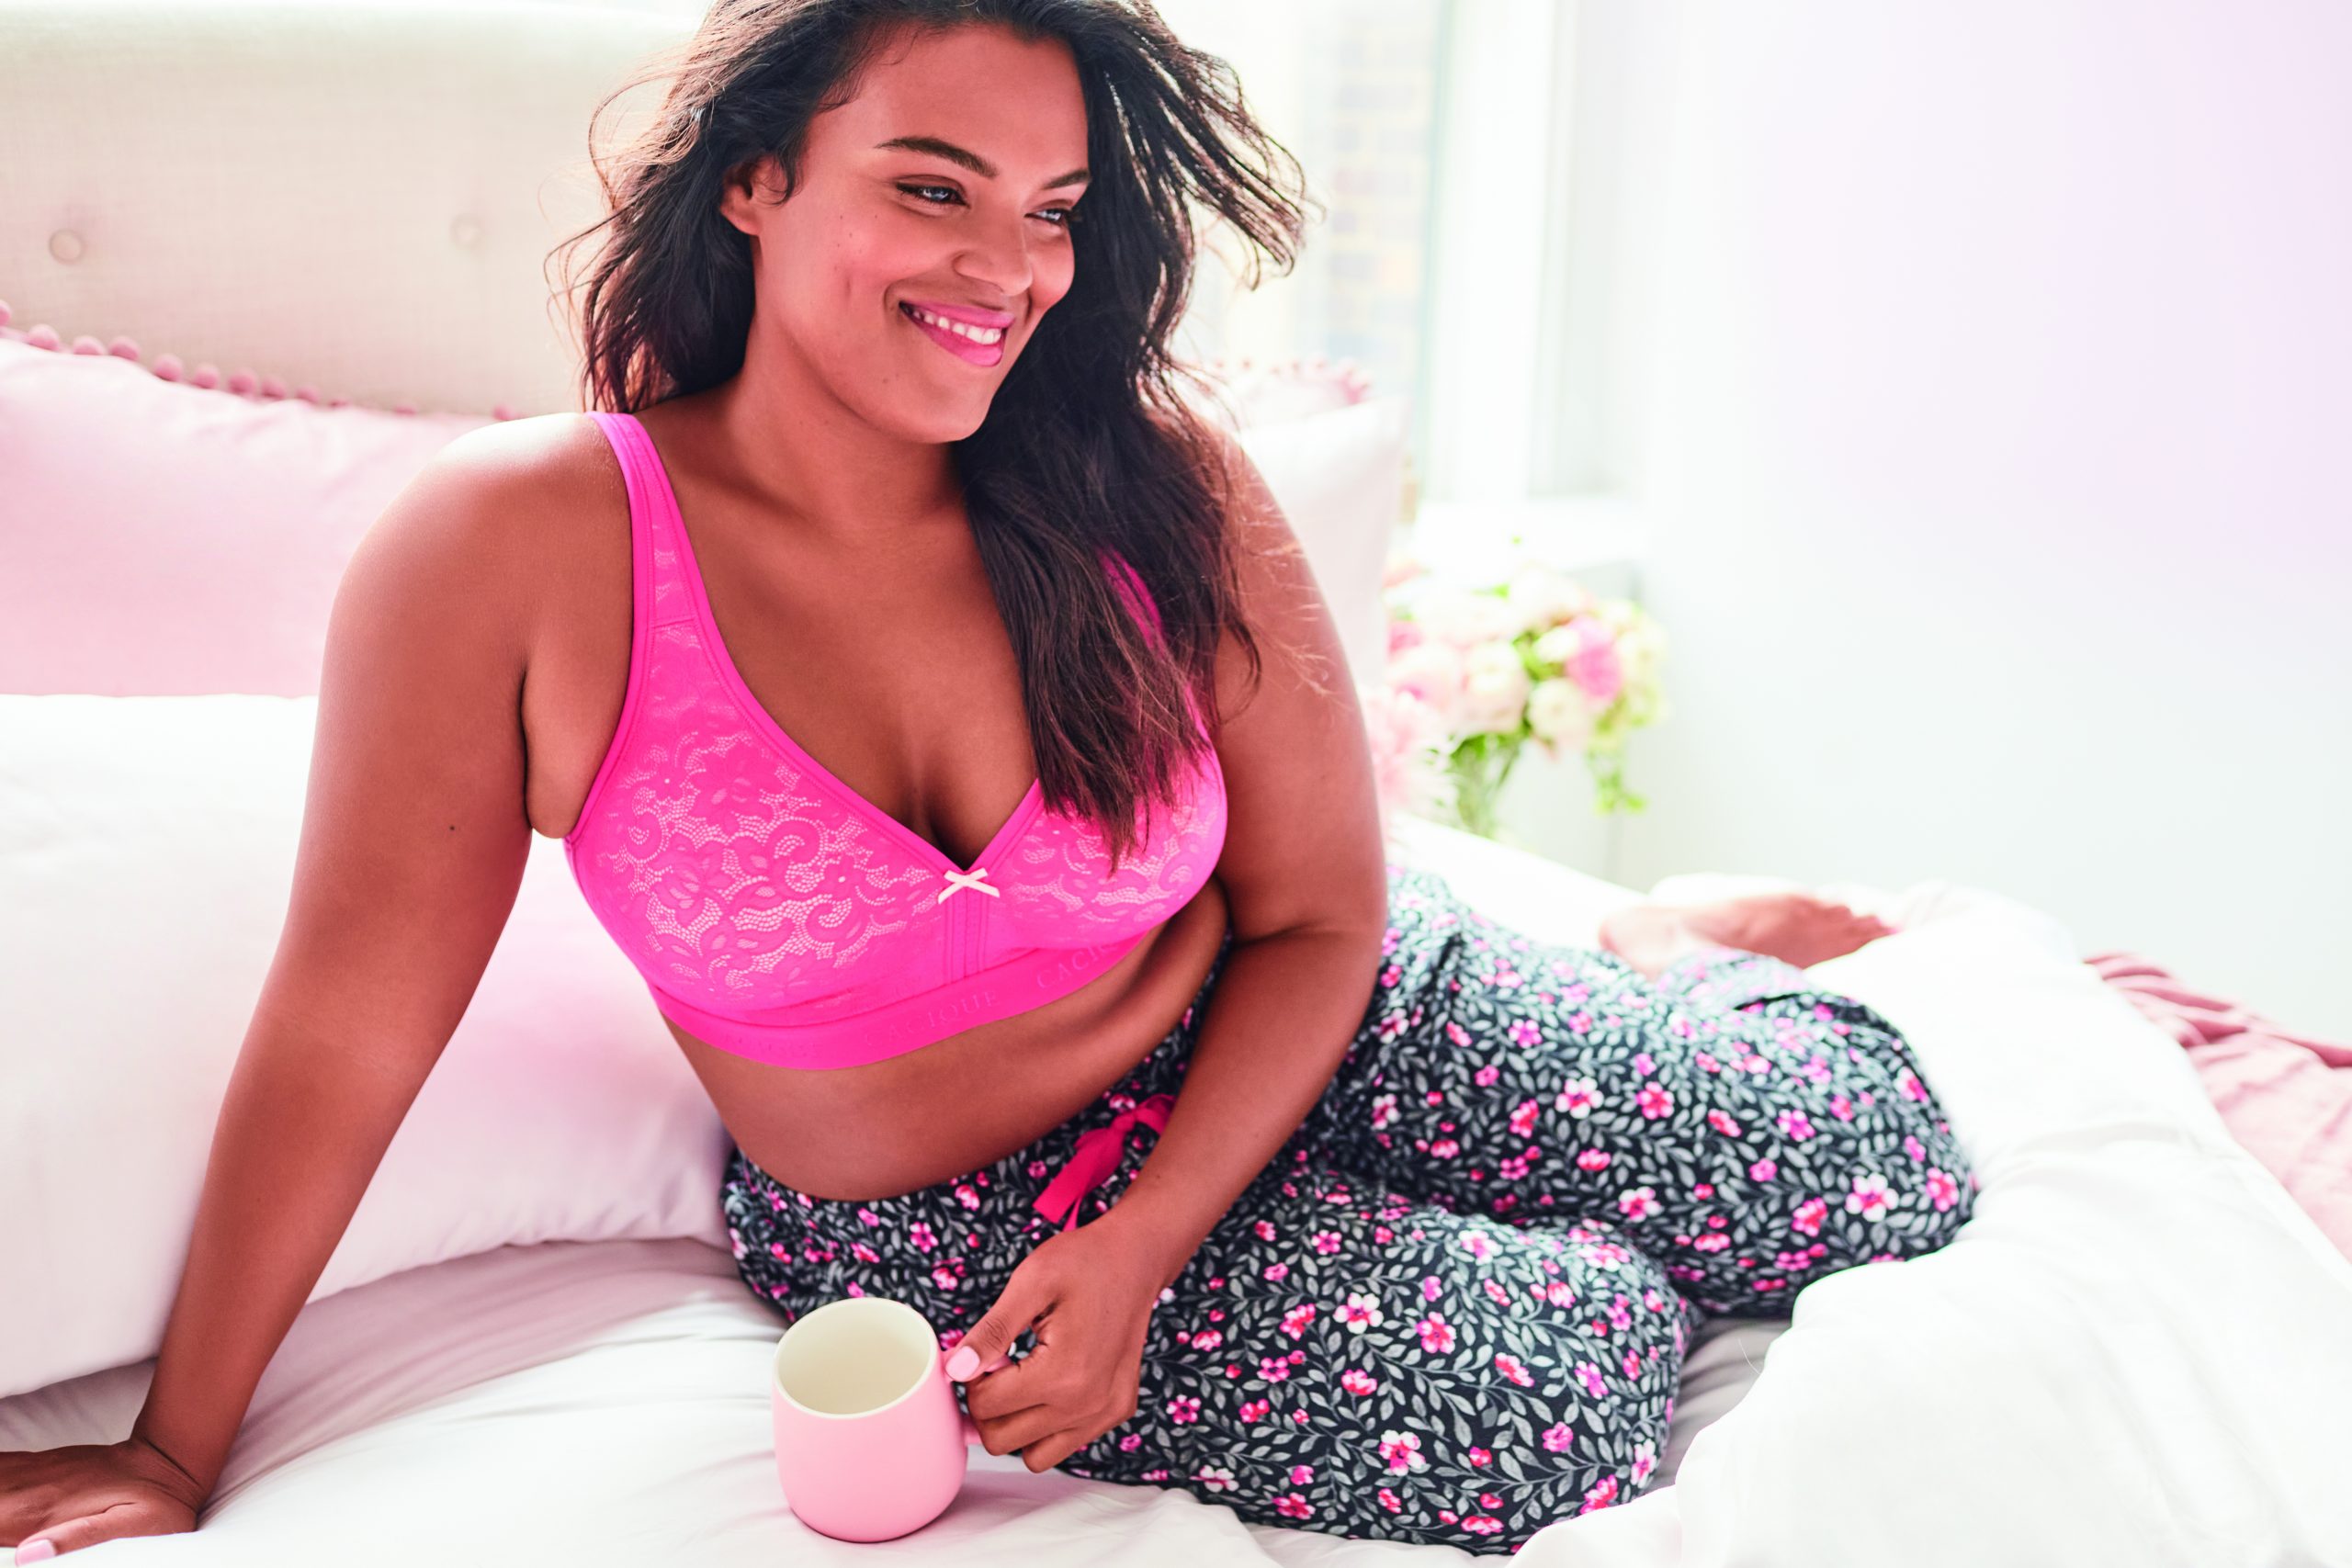 Lane Bryant's Cacique lingerie line up to 30% of company's sales